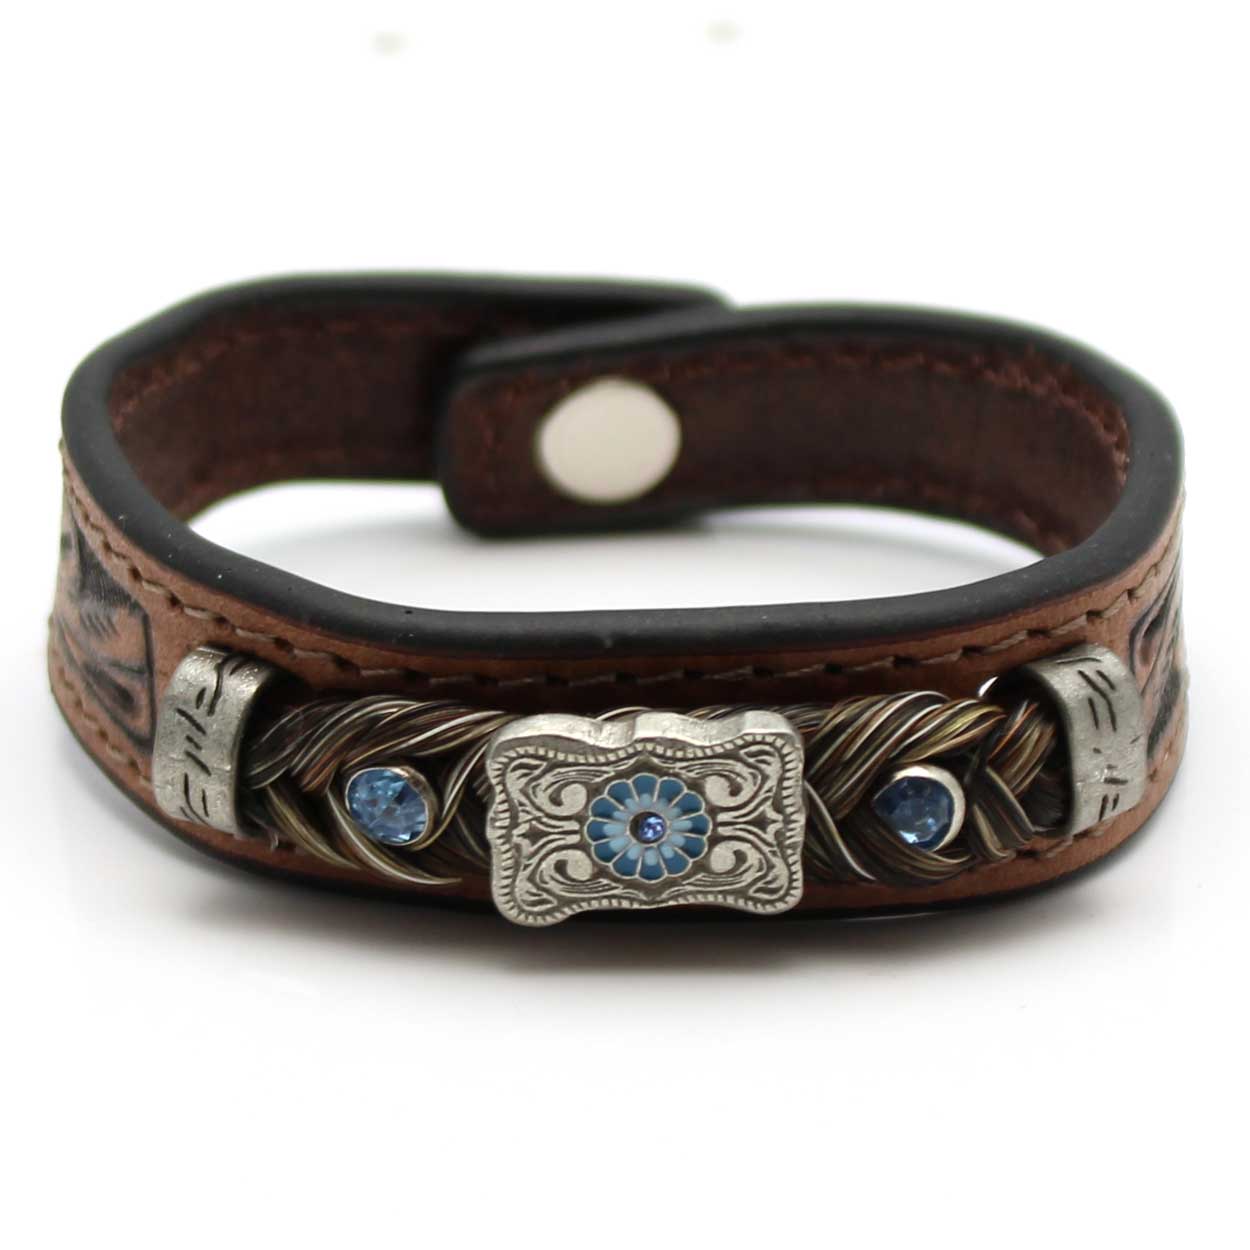 Stamped Leather & Brown Horse Hair Bracelet With Metal Accents - Blue